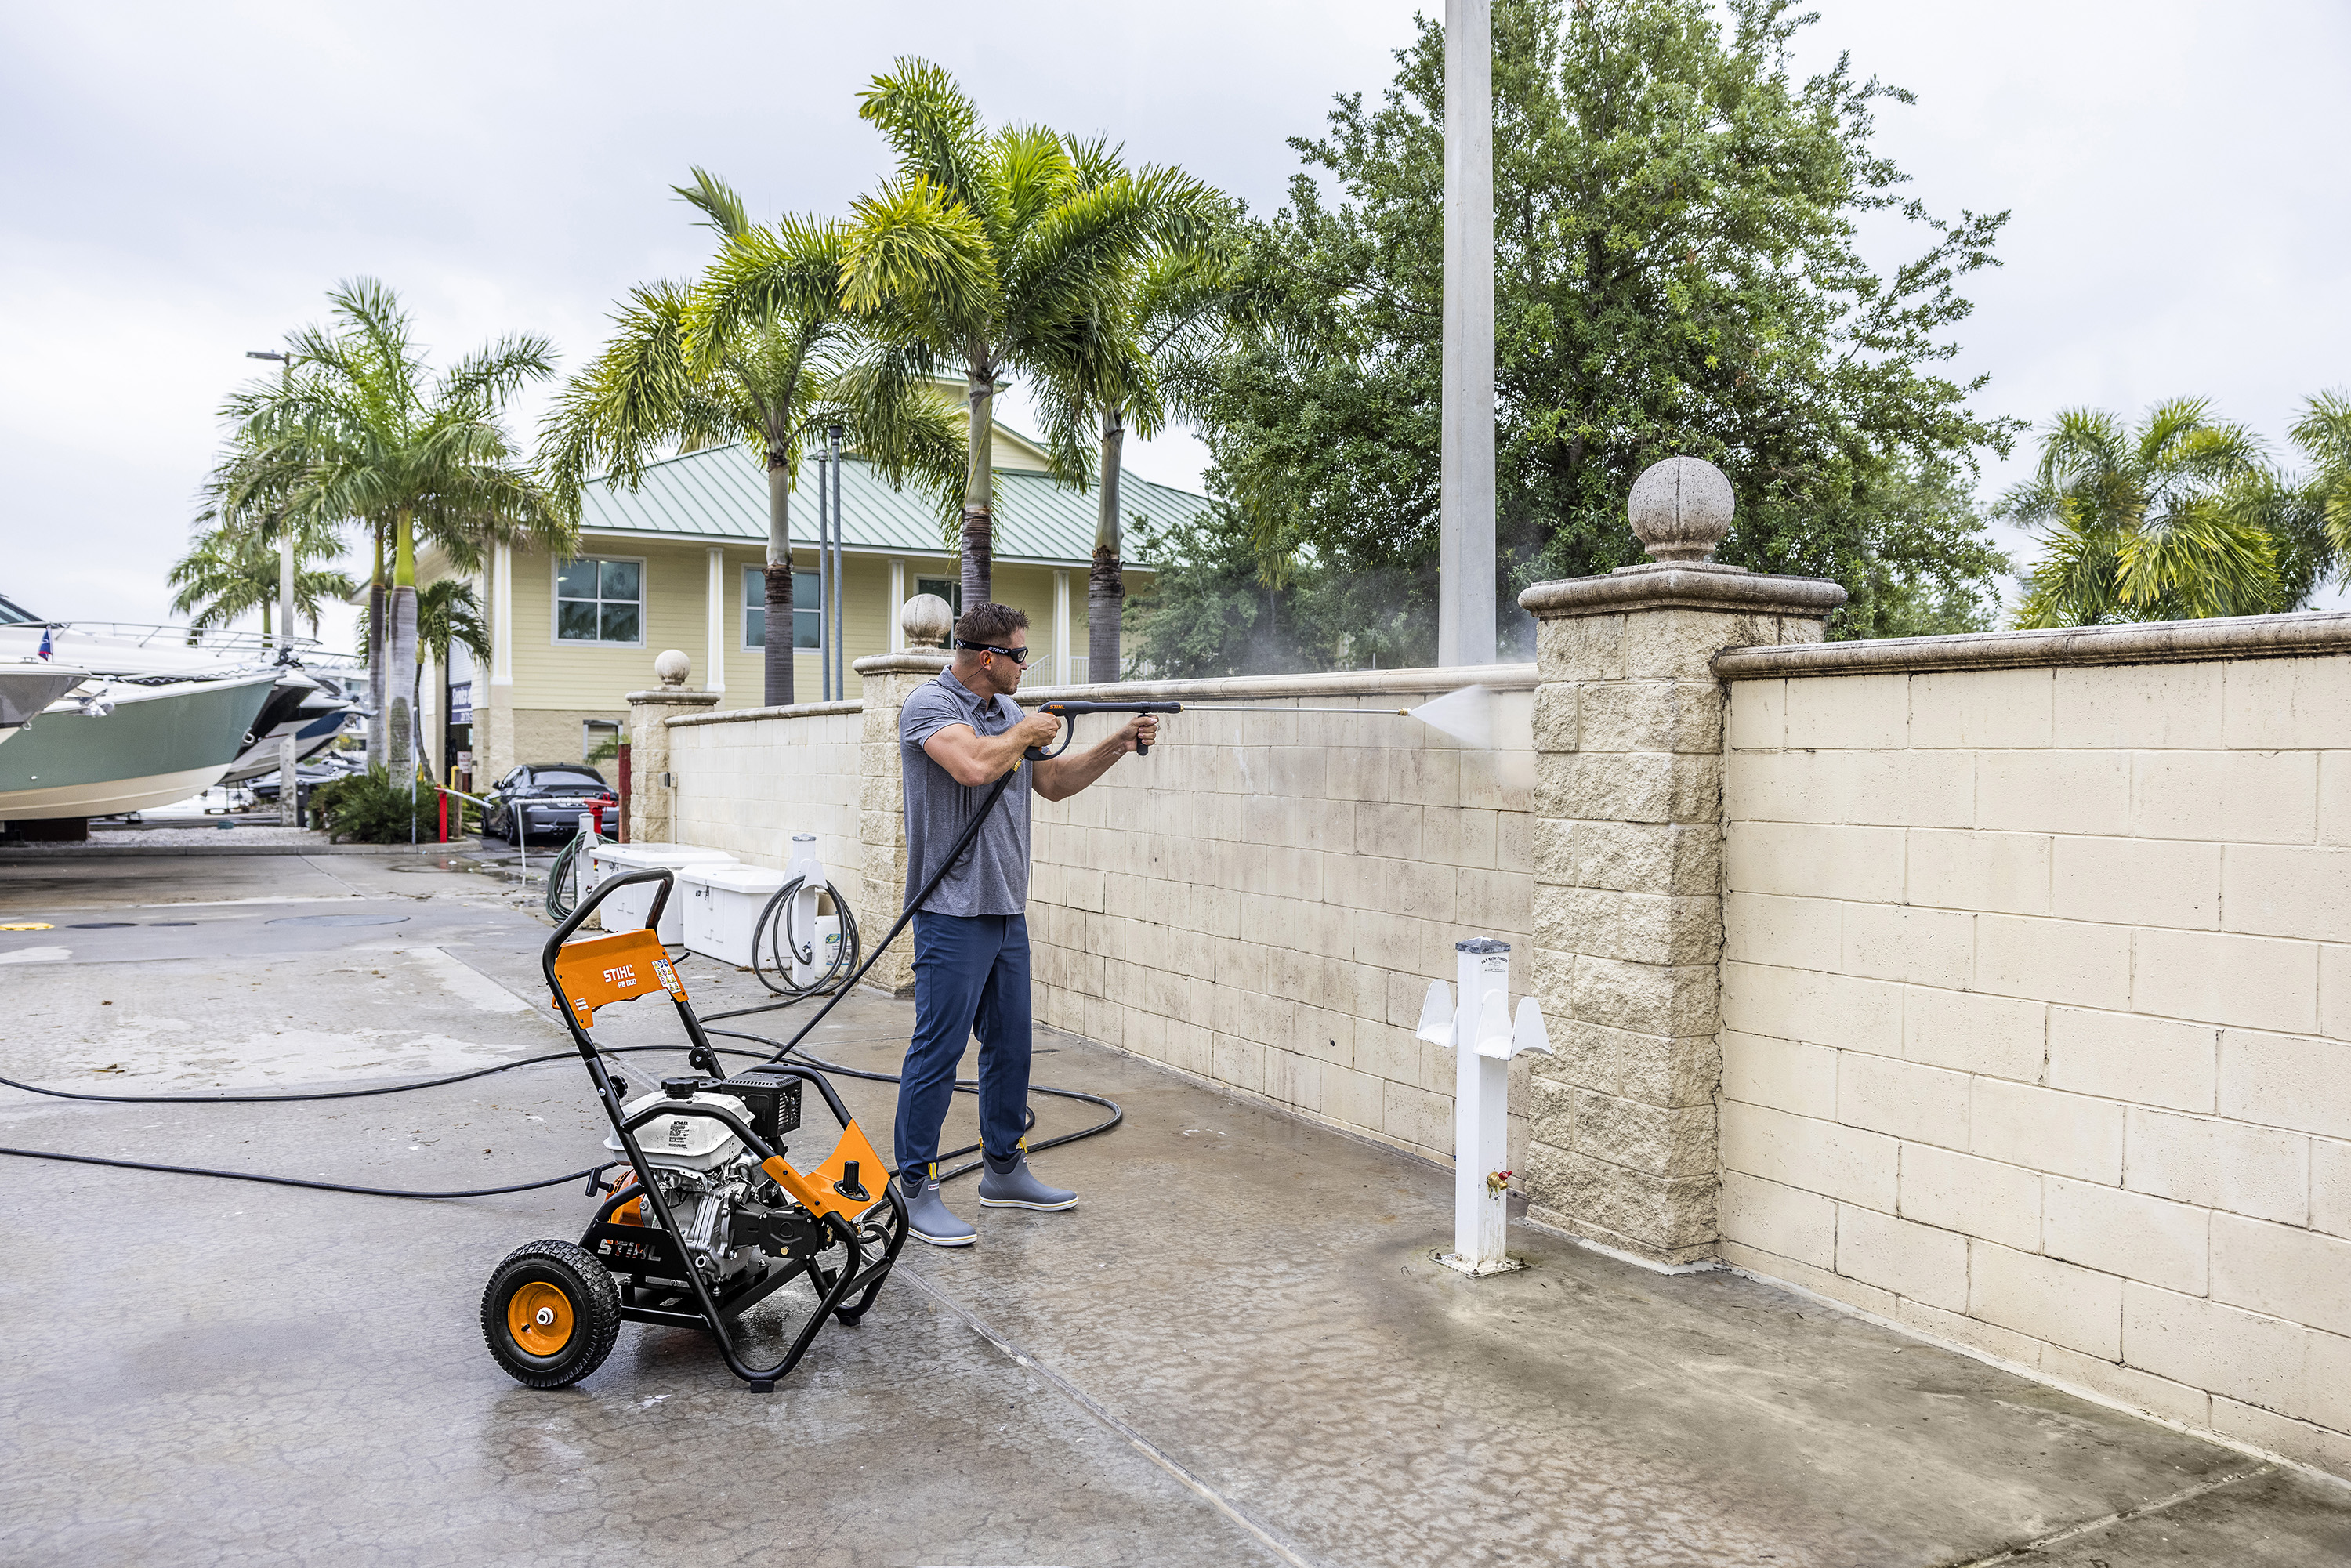 Stihl Rb 200 Pressure Washer How To Start How to Start a Pressure Washer | Articles | STIHL USA